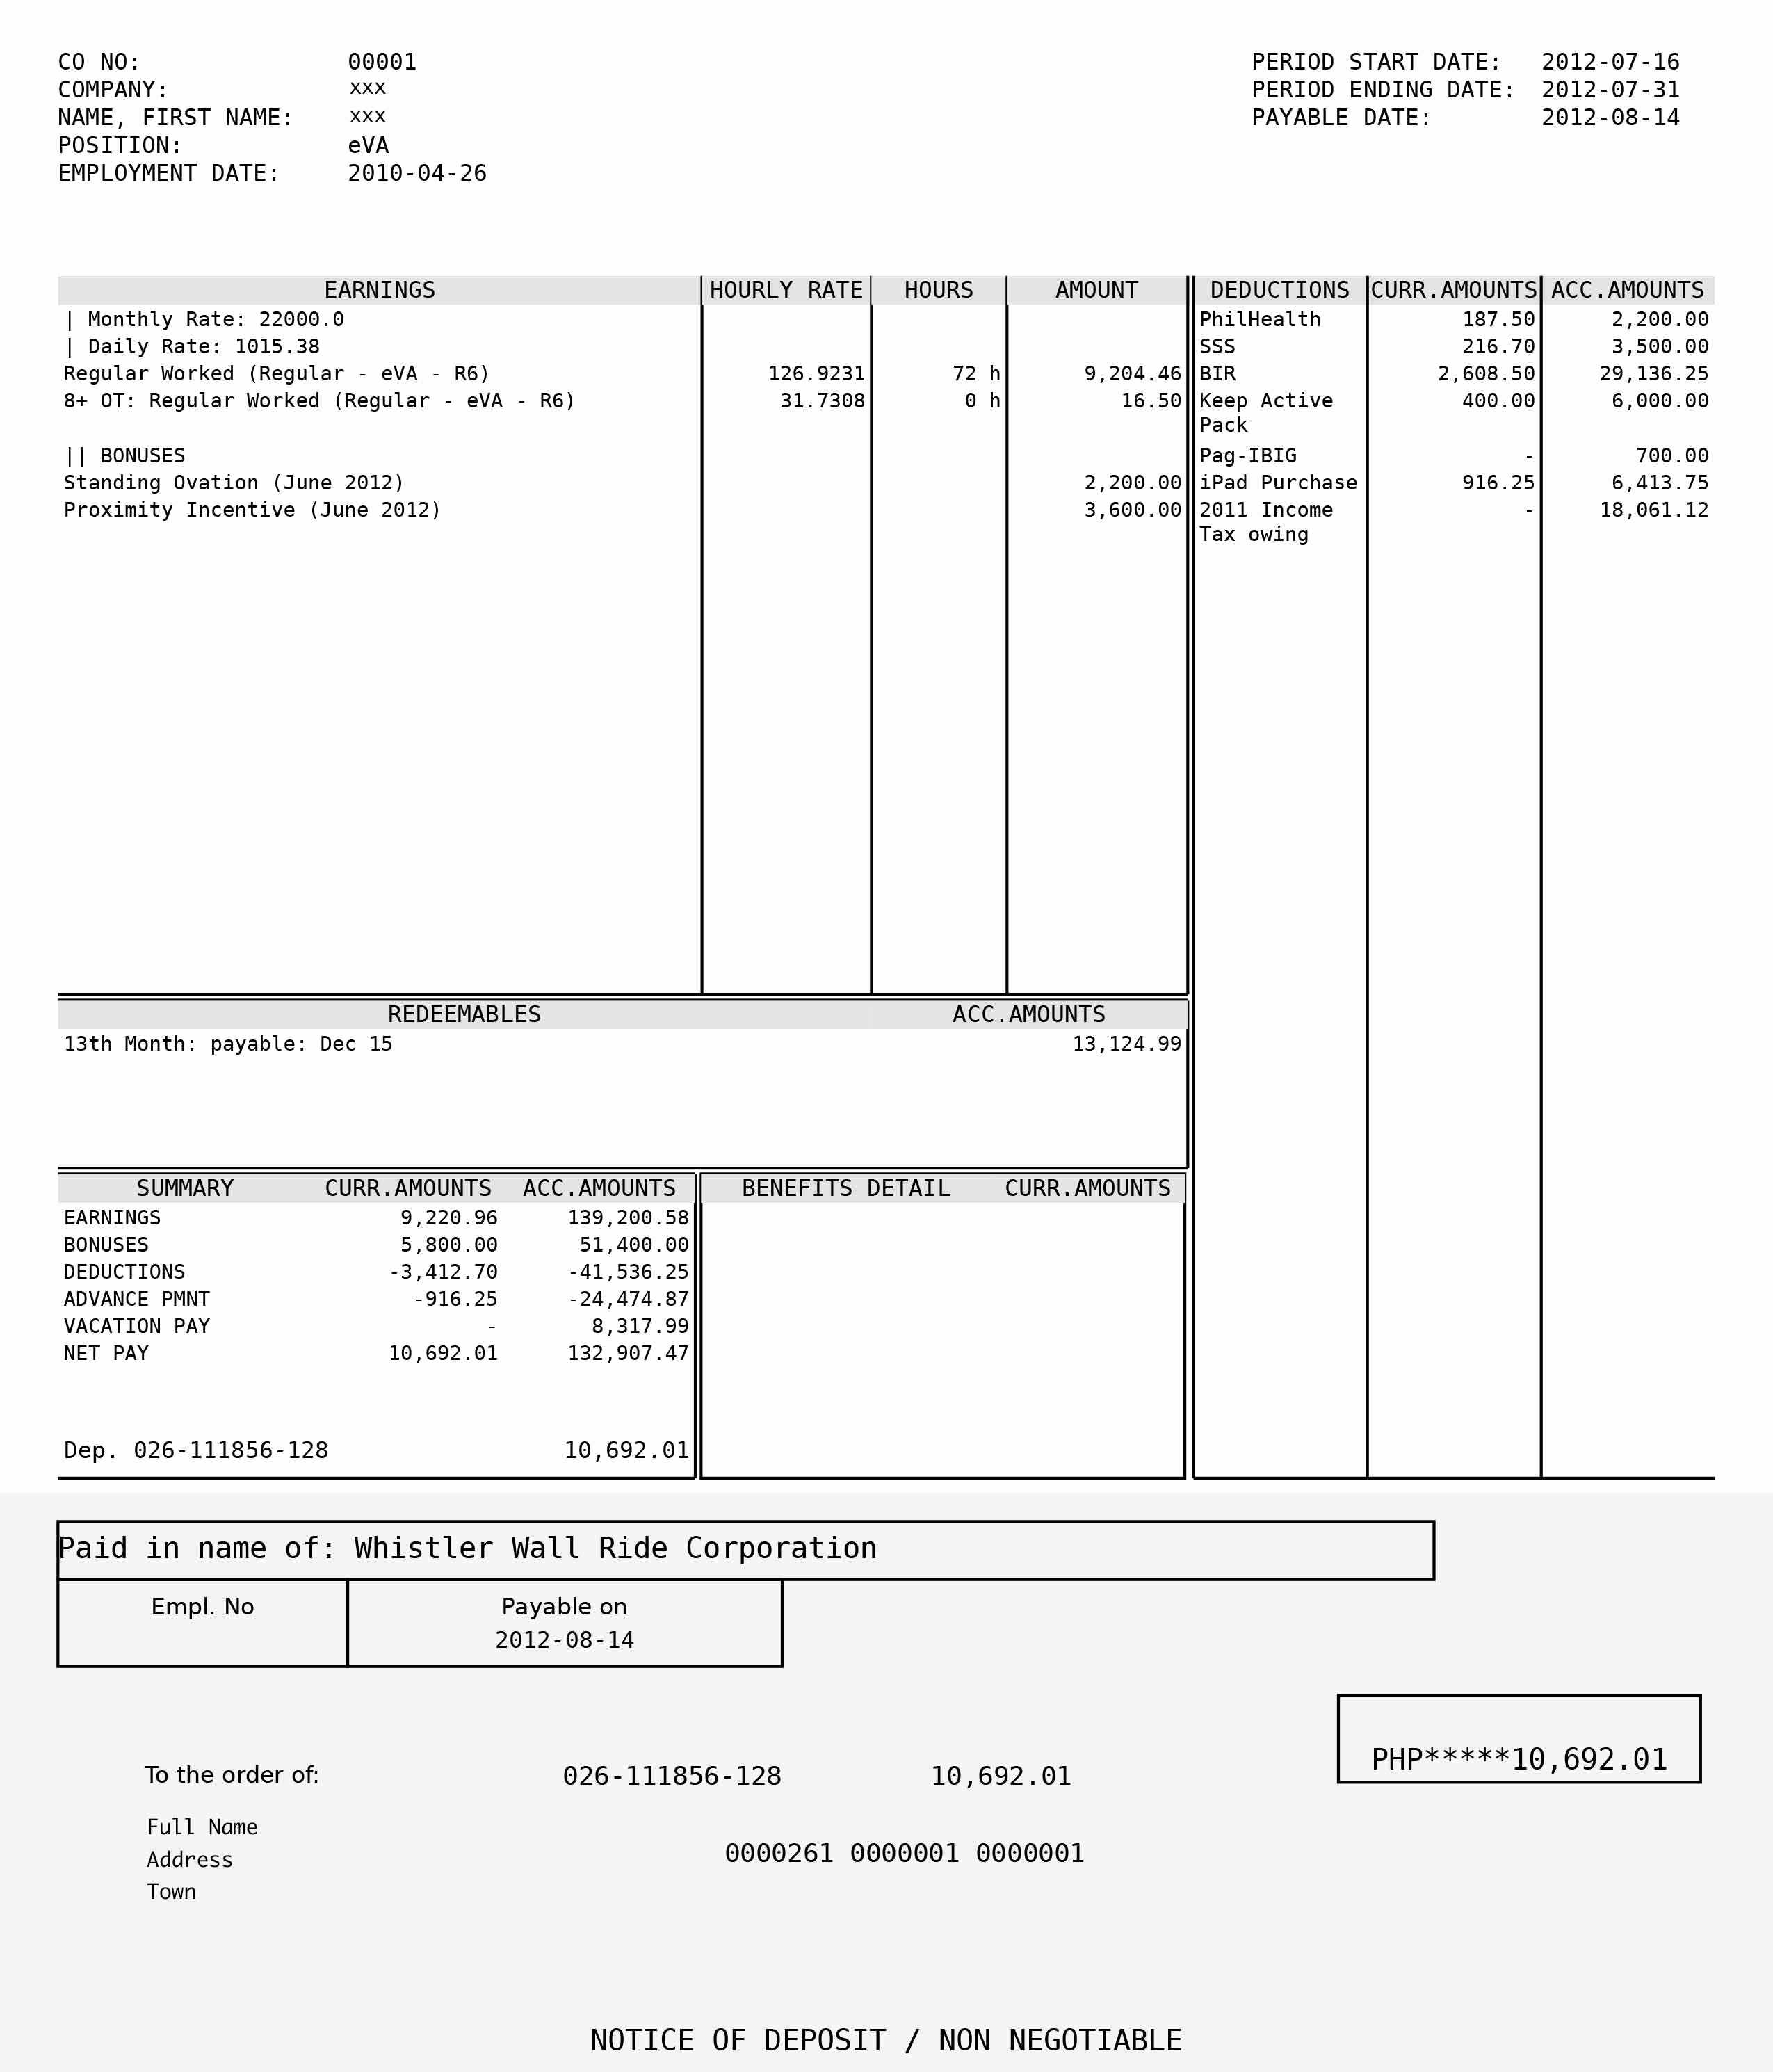 Employee Pay Stub Template Free Fresh Sample Paycheck Stubs with Deductions to Pin On